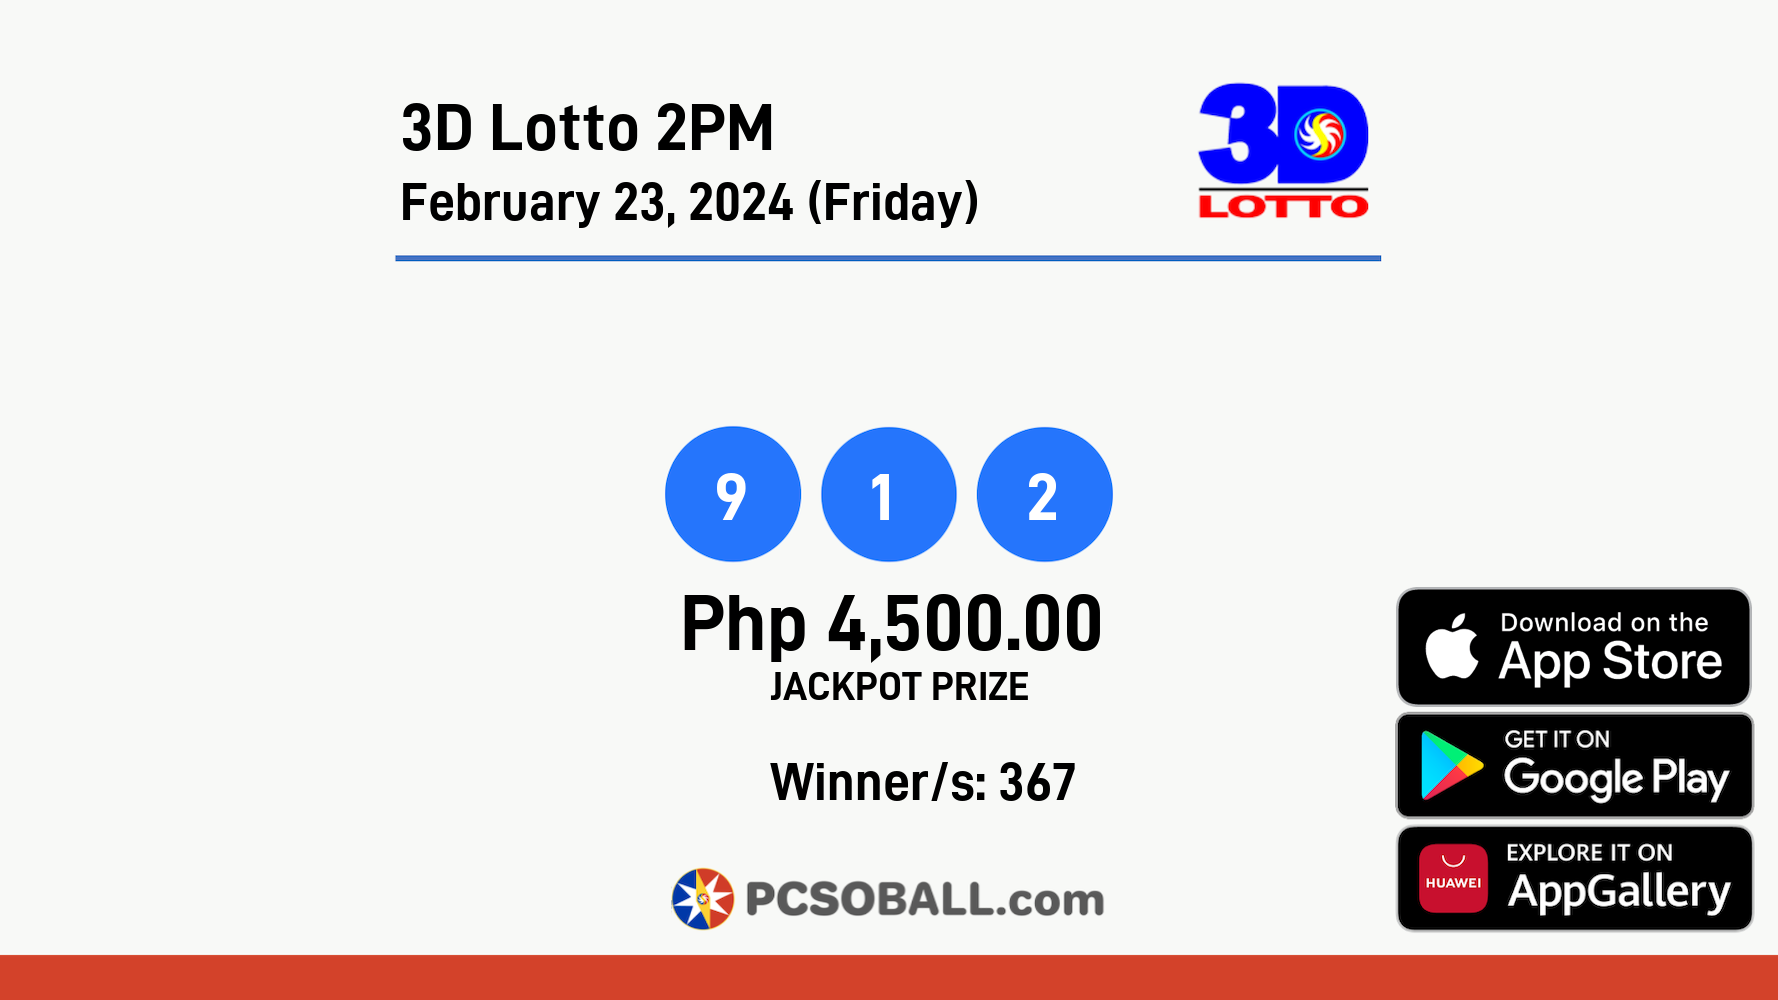 3D Lotto 2PM February 23, 2024 (Friday) Result